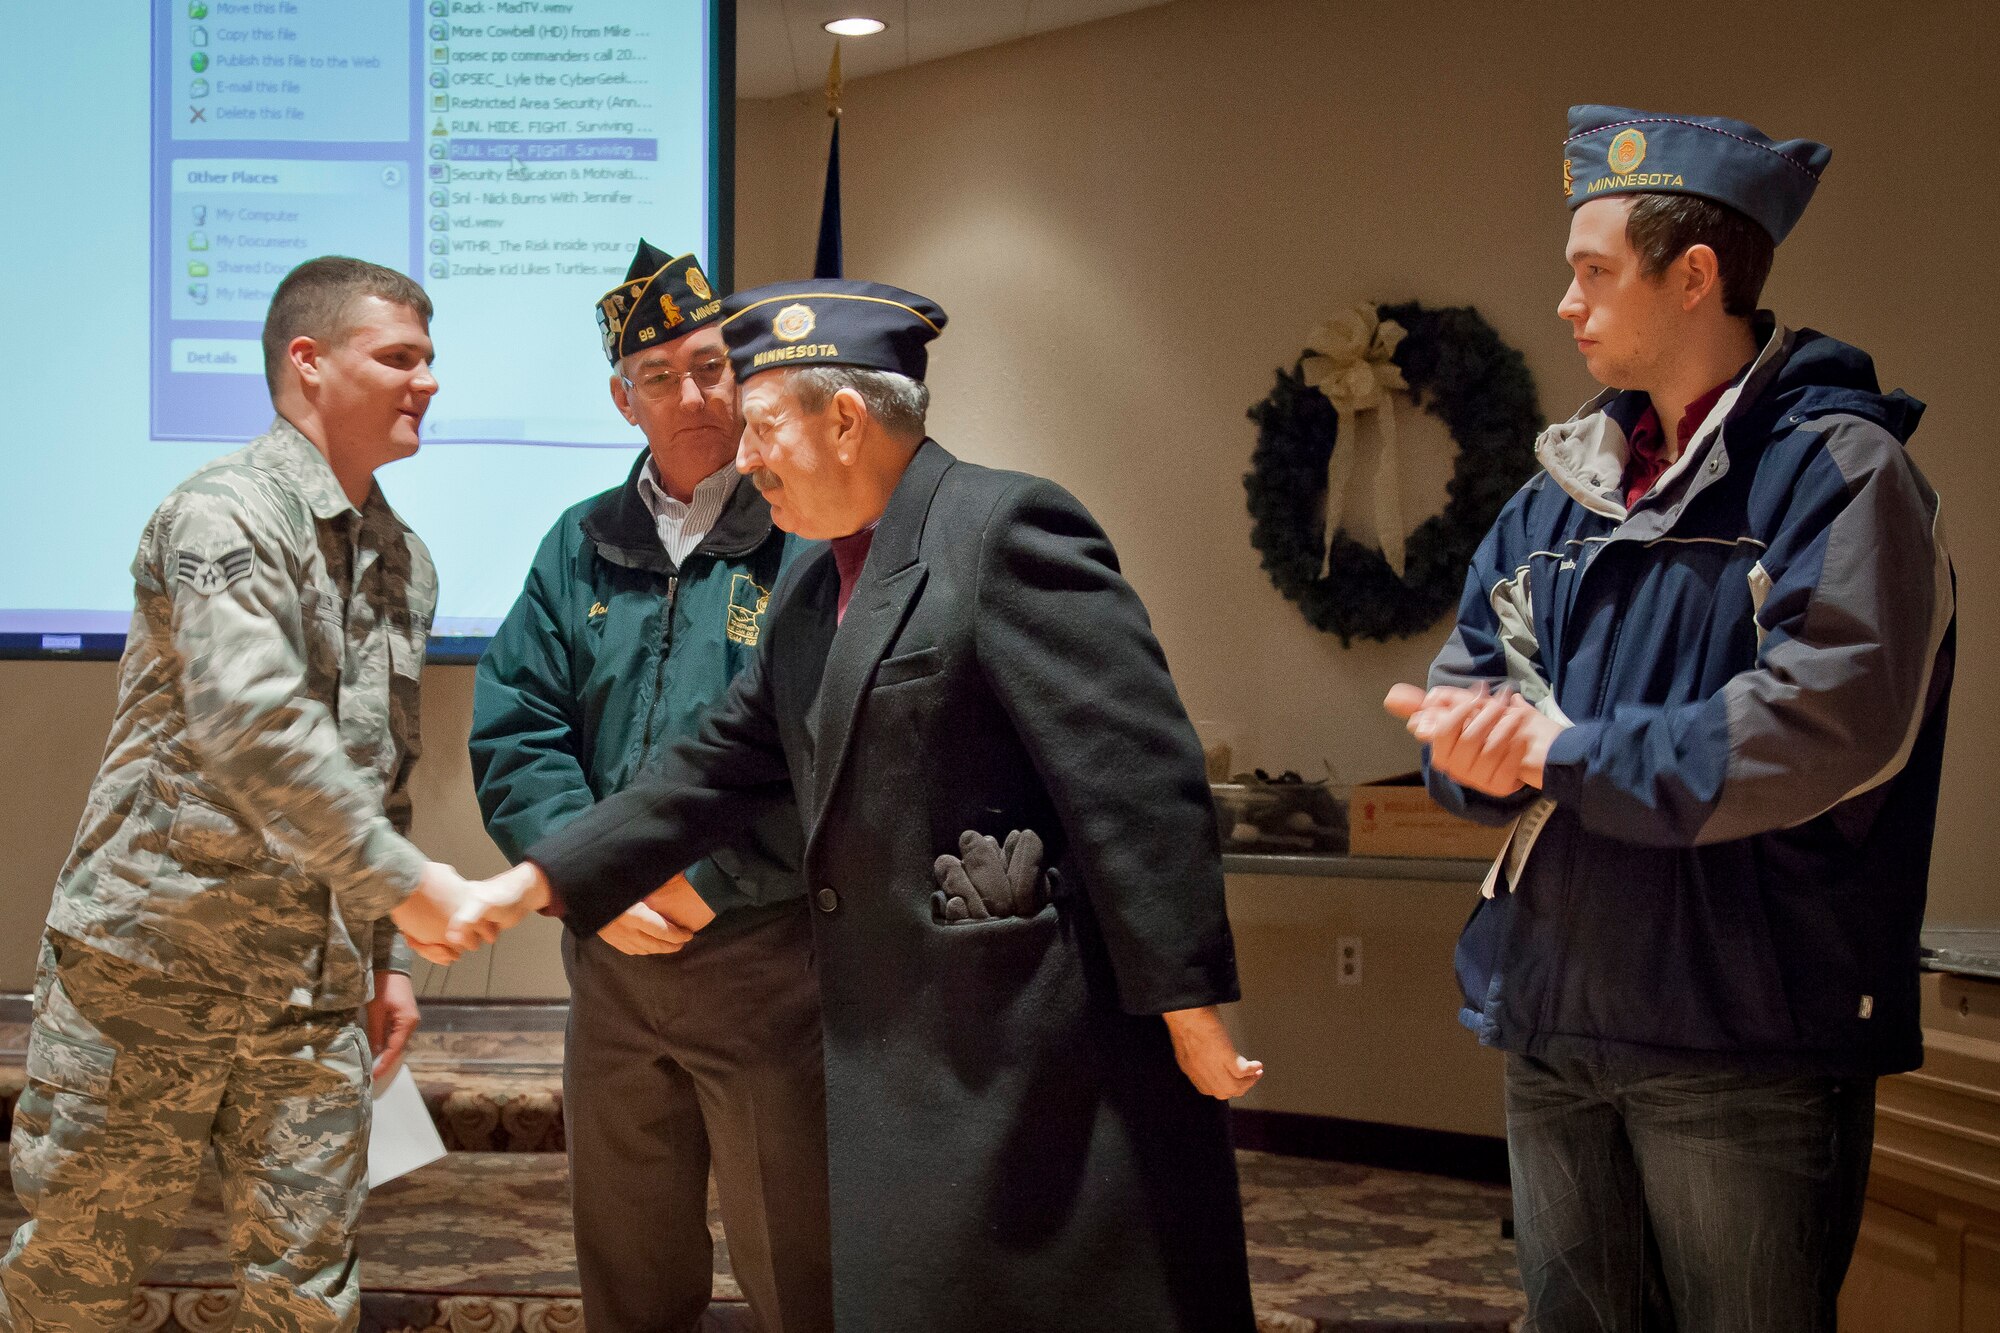 From American Legion Post #99, Commander Roger Fahrenkrug, Joe Bayer, and John Bayer recognize Senior Airman Zachary Allen, 27 Aerial Port Squadron for receiving the Legion's Certificate of Appreciation at the Minneapolis-St. Paul Air Reserve Station, Minn. (U.S. Air Force Photo/Shannon McKay)